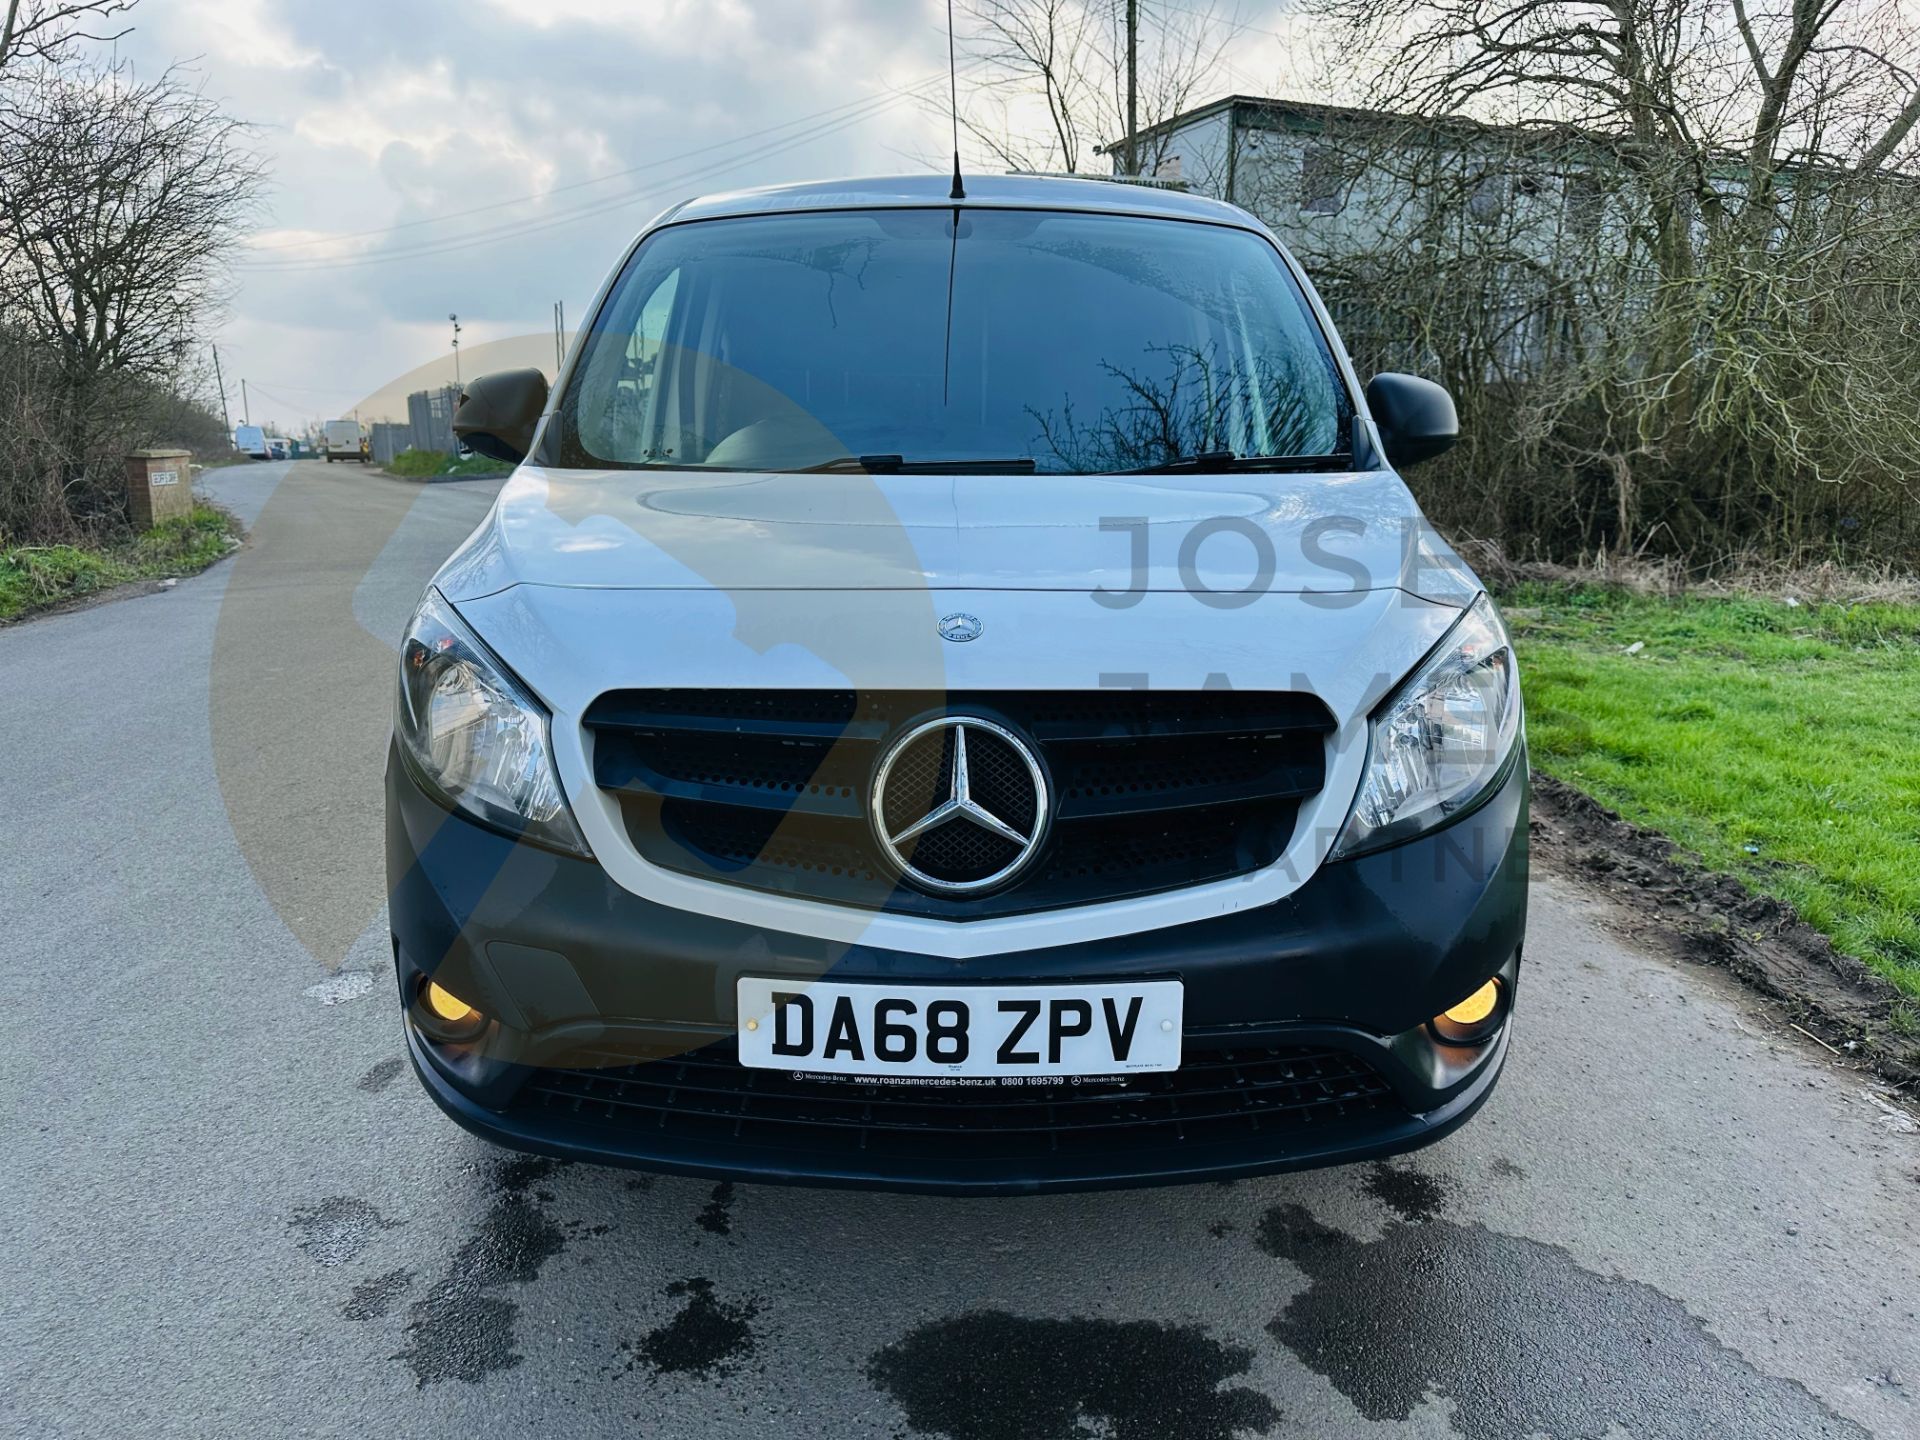 (On Sale) MERCEDES CITAN 111CDI "LWB" 2019 MODEL - AIR CON - EURO 6 - ELECTRIC PACK - NO VAT!!! - Image 3 of 28